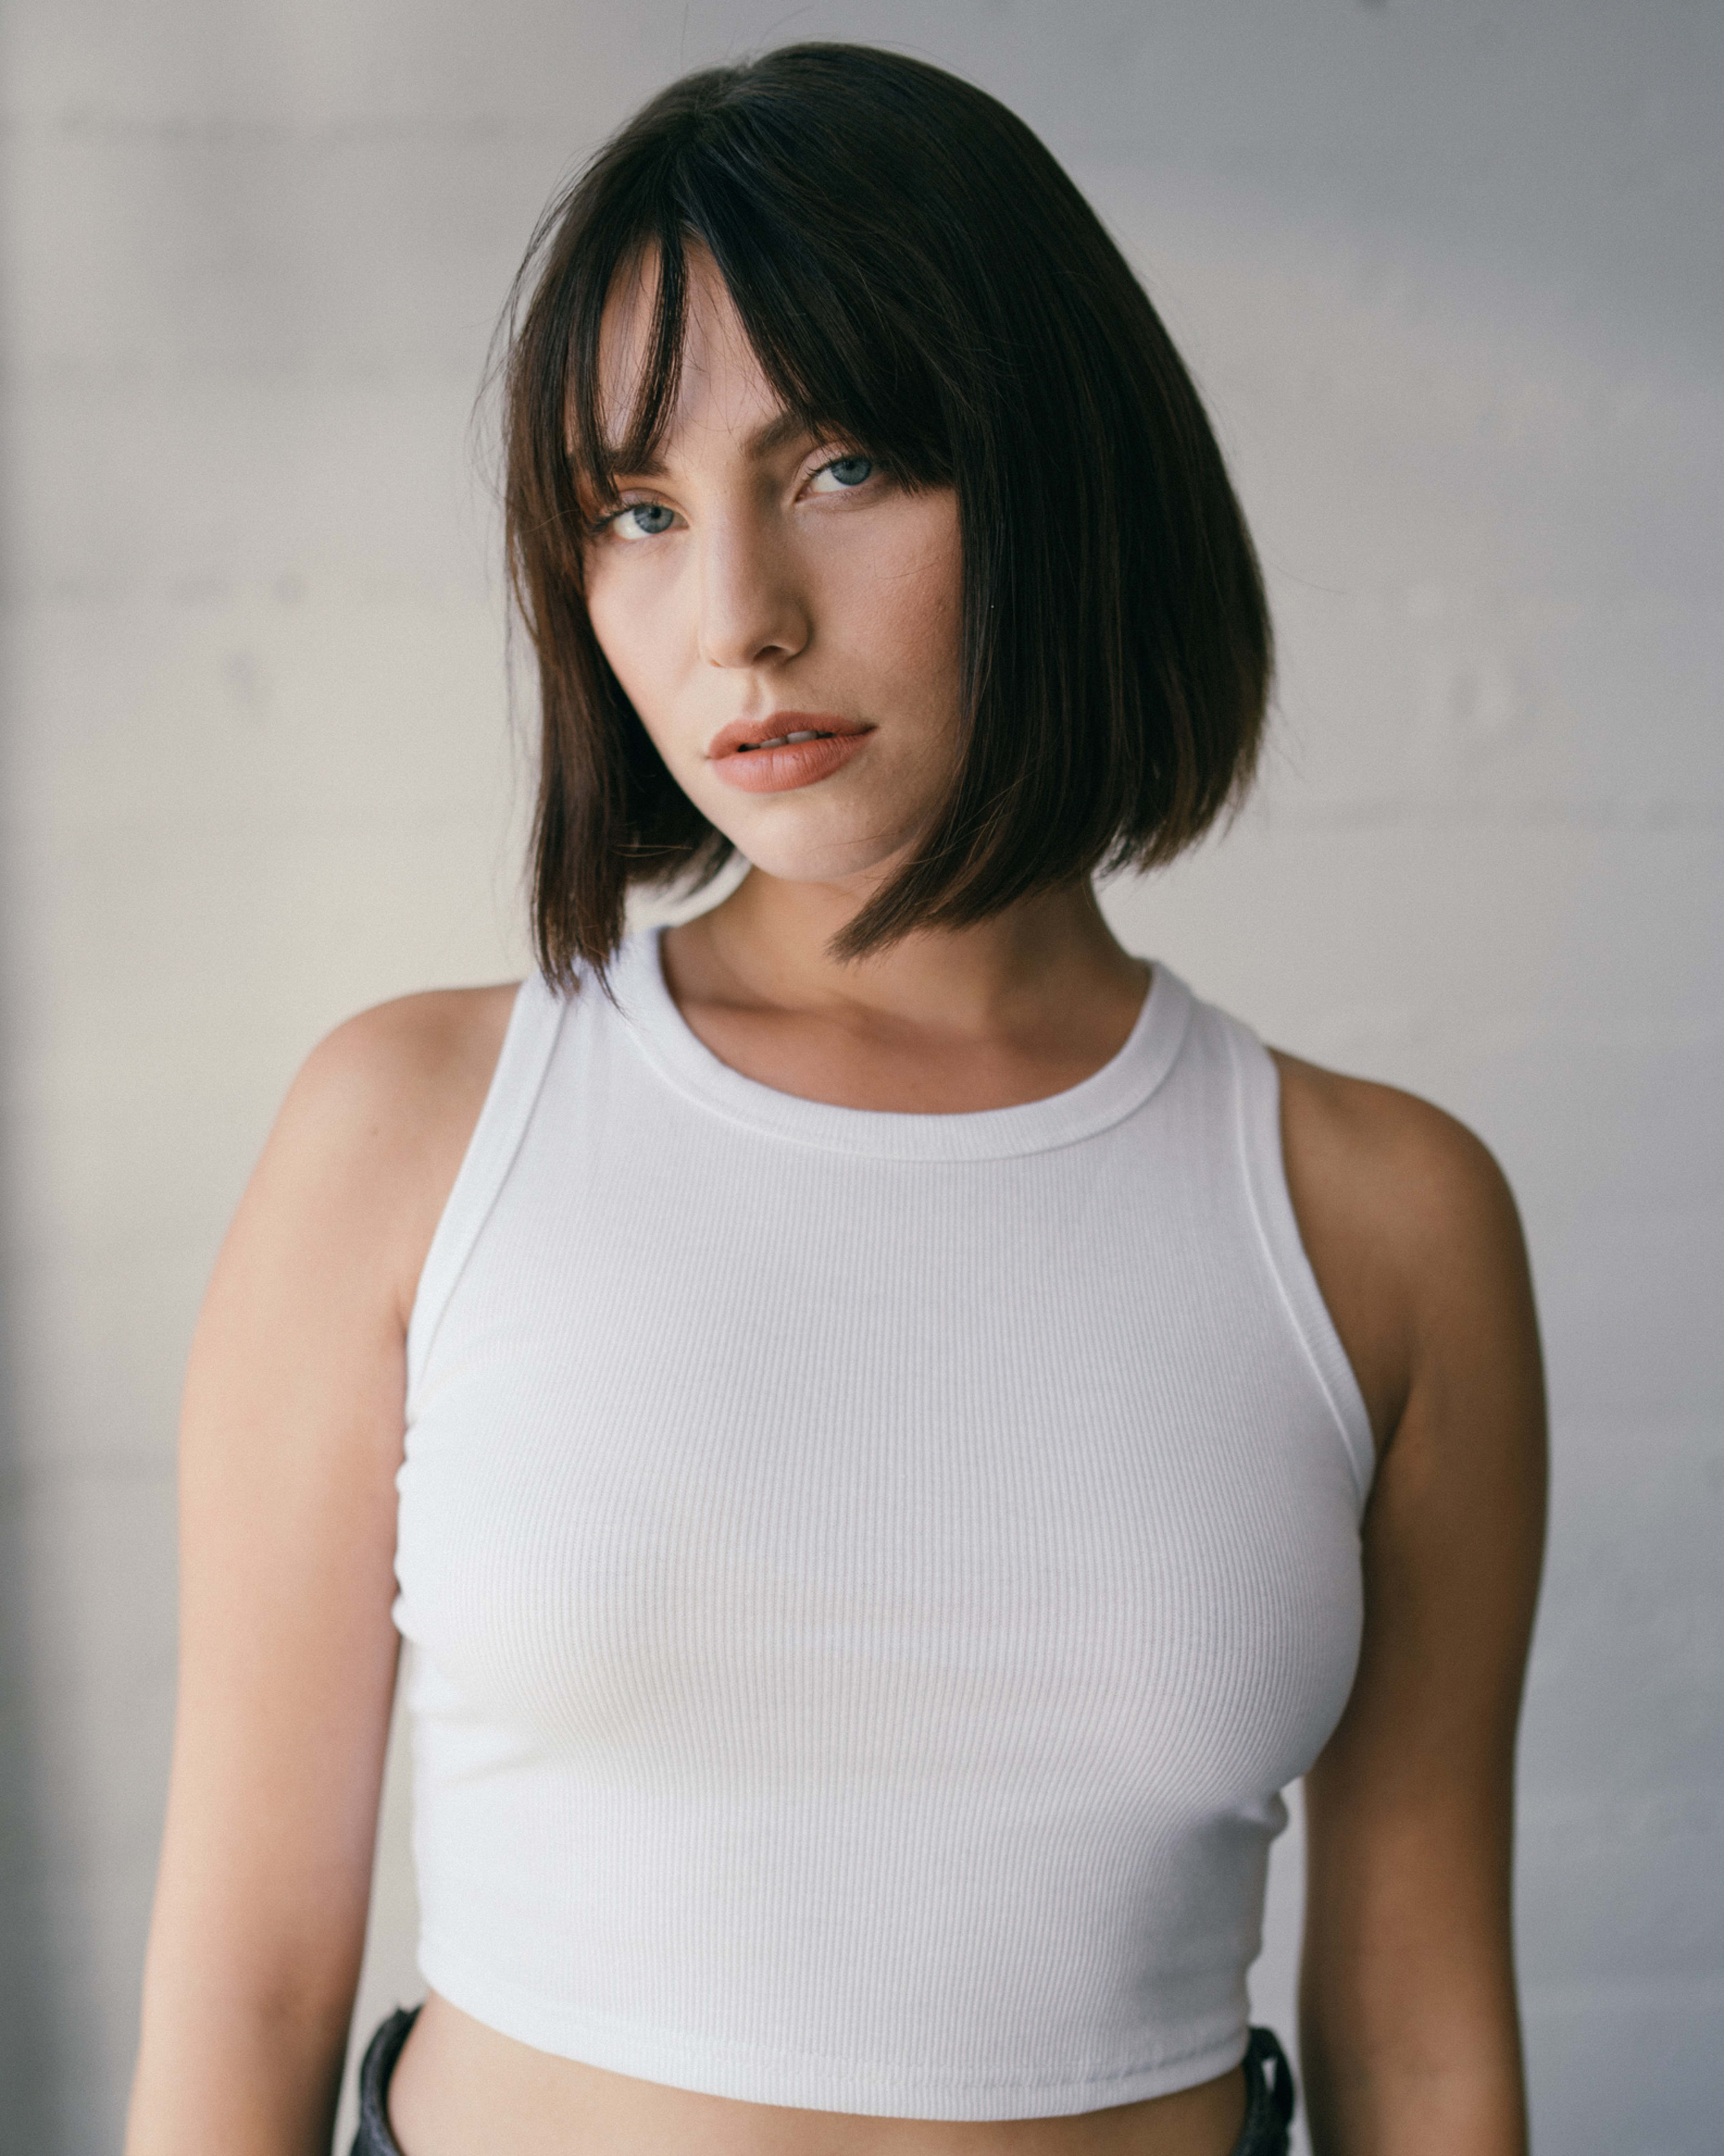 A woman in a white crop top posing for a minimalist  headshot.